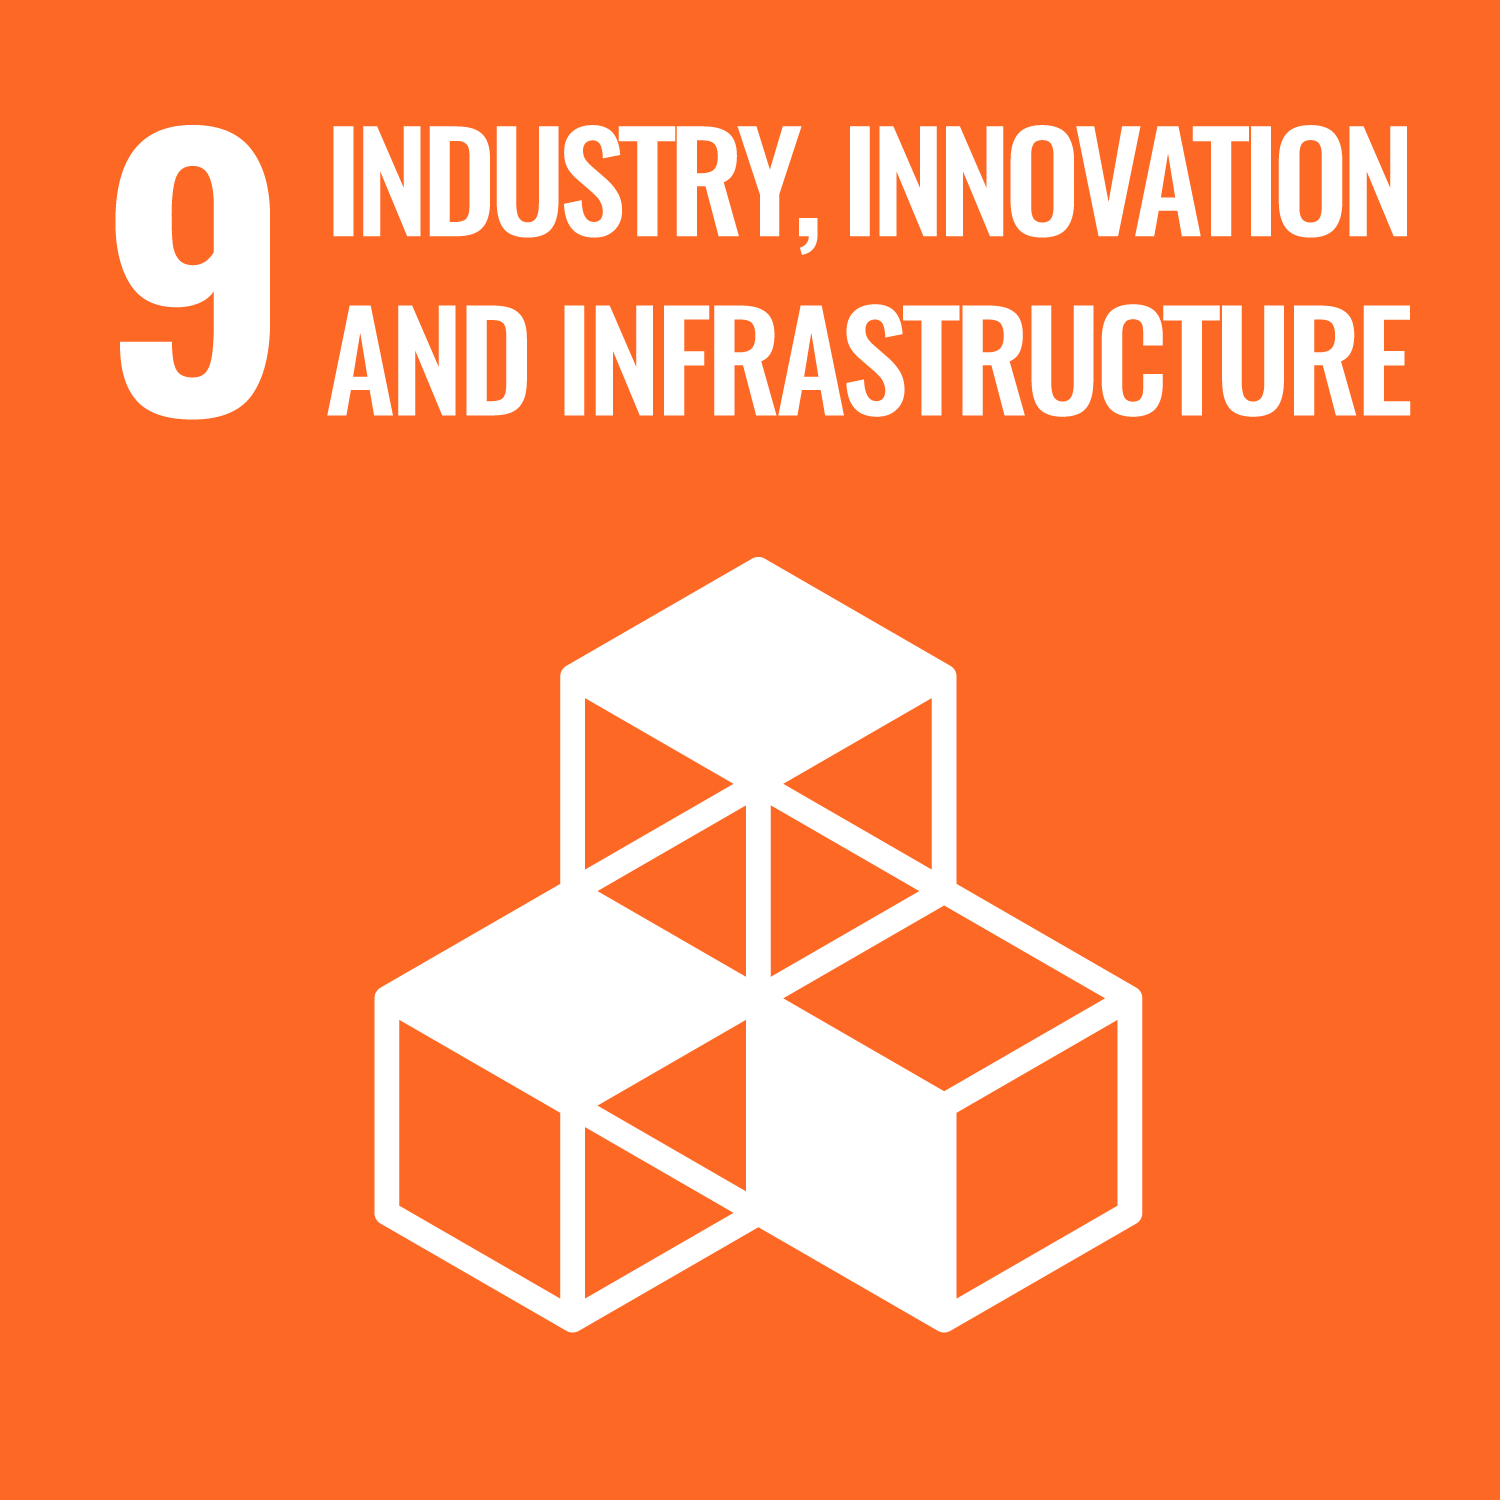 INDUSTRIES, INNOVATION AND INFRASTRUCTURE